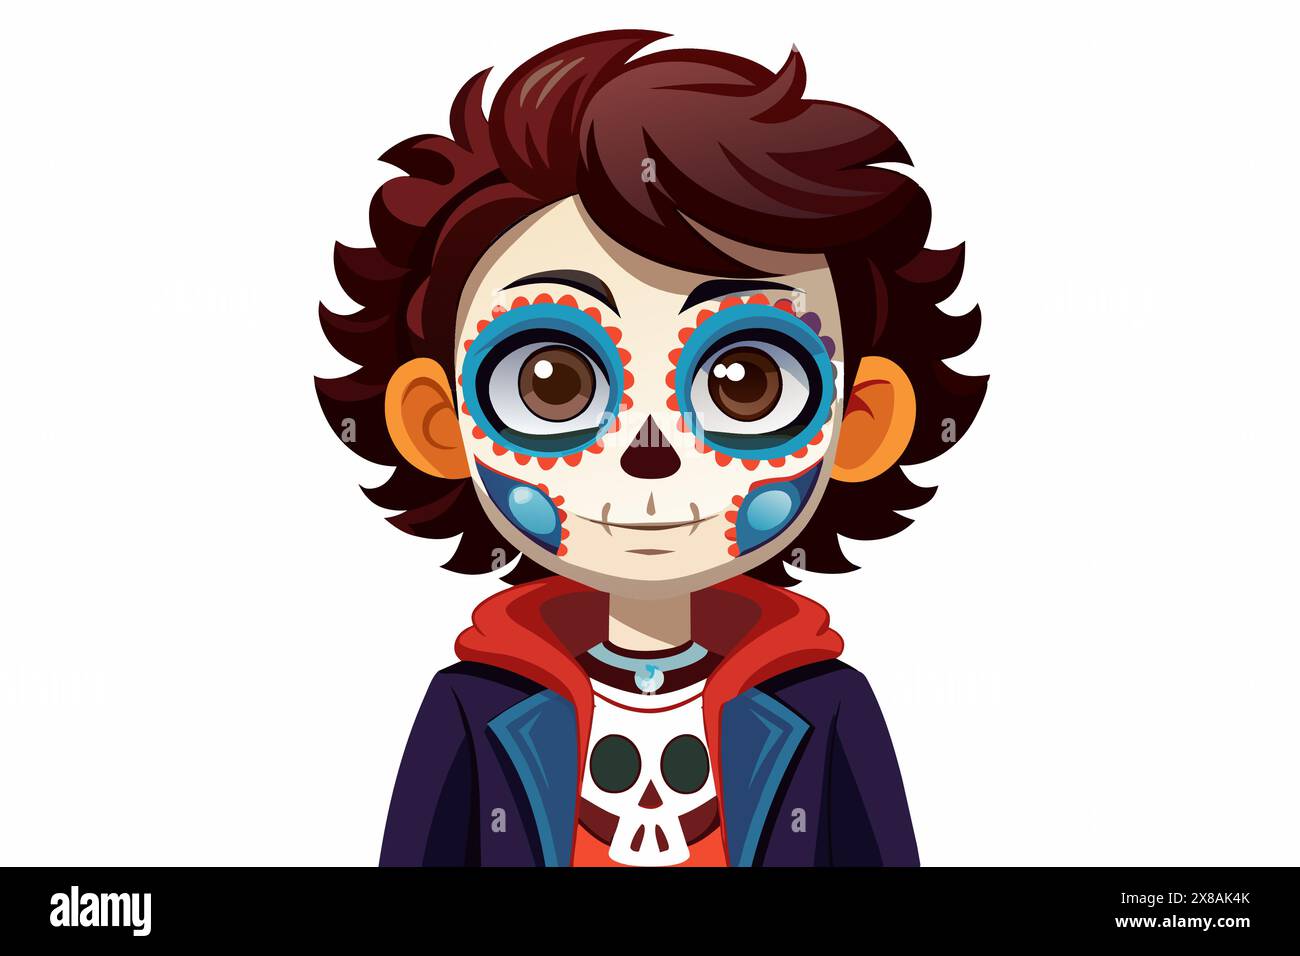 Boy with Day of the Dead makeup. Child with sugar skull face paint. Isolated on white backdrop. Concept of Dia de los Muertos, Mexican cultural tradit Stock Vector